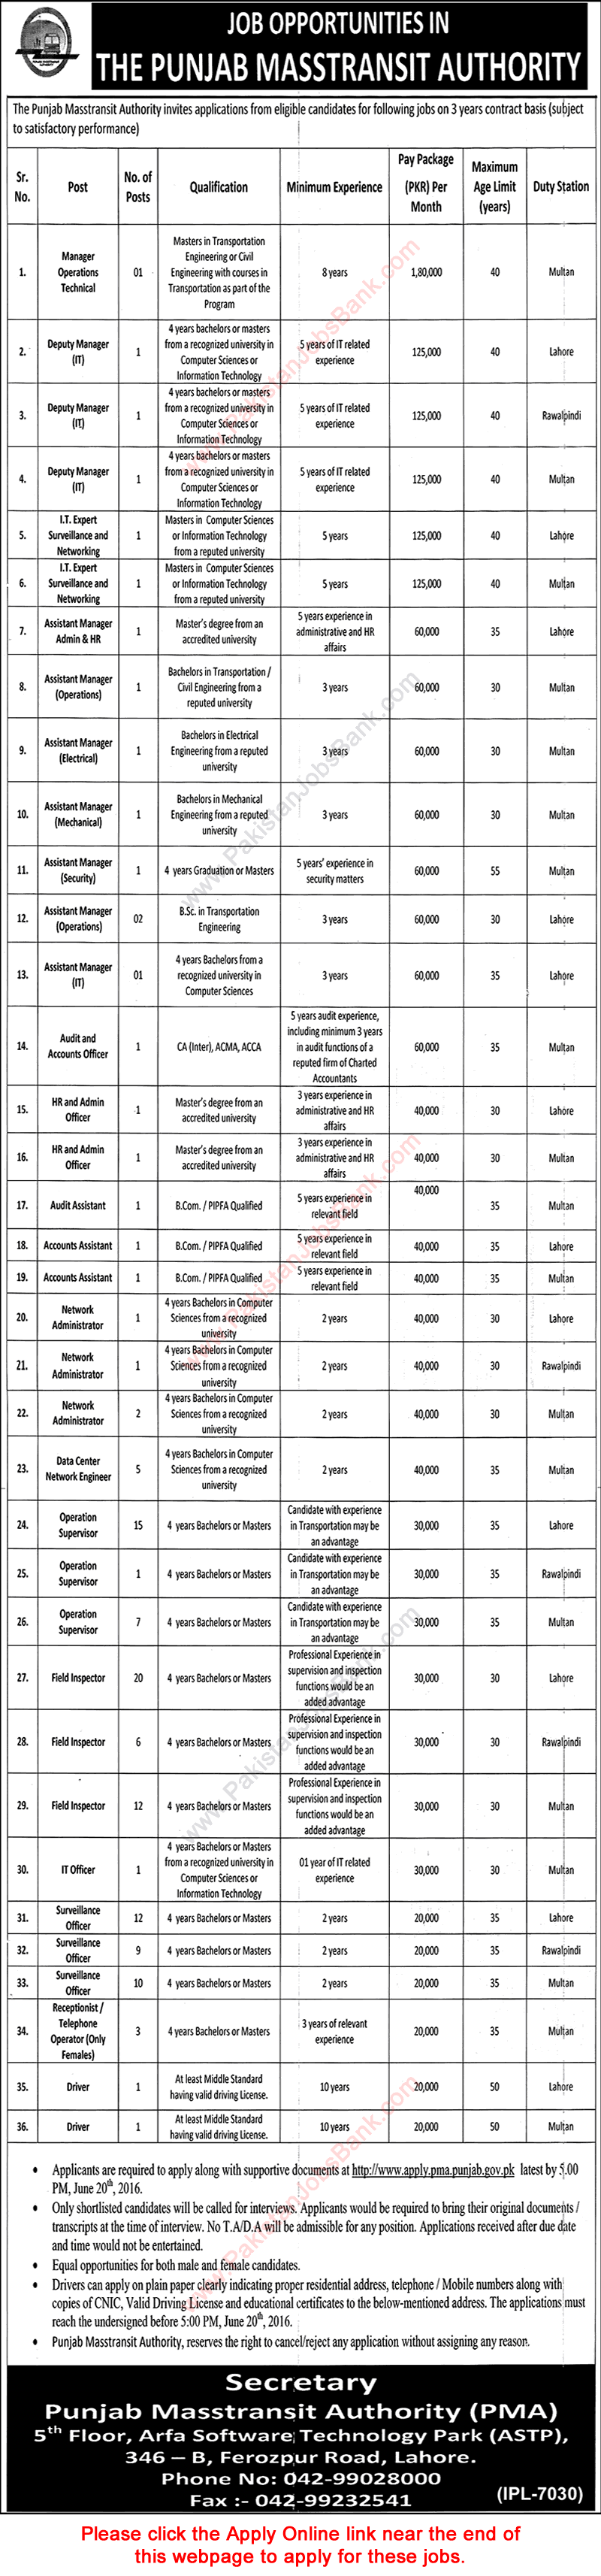 Punjab Metrobus Authority Jobs June 2016 Apply Online Surveillance Officers, Field Inspectors & Others Latest / New